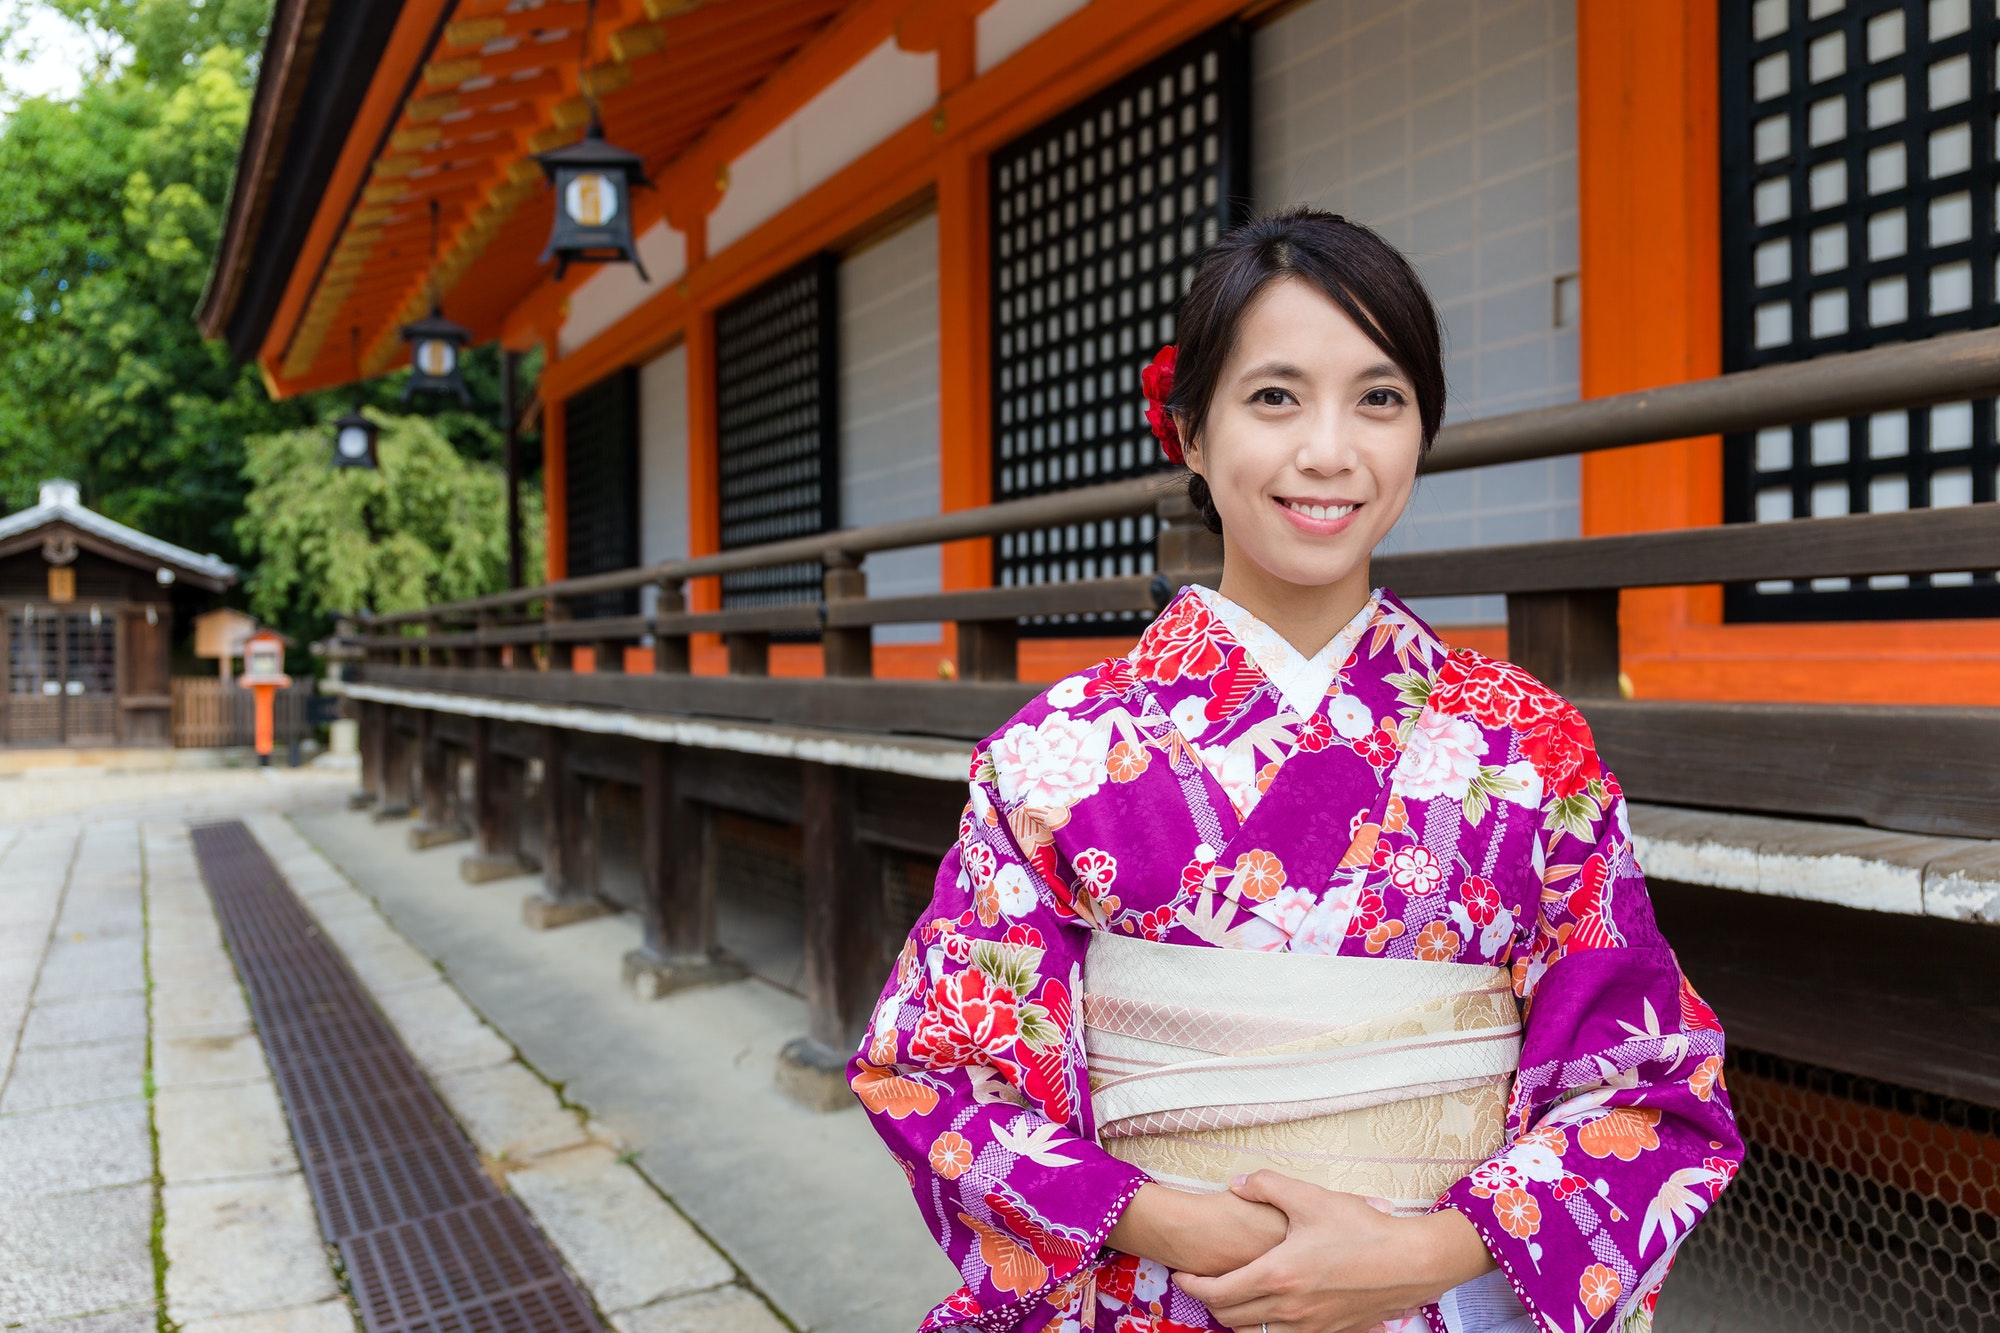 Japanese Woman with traditional Japanese costume